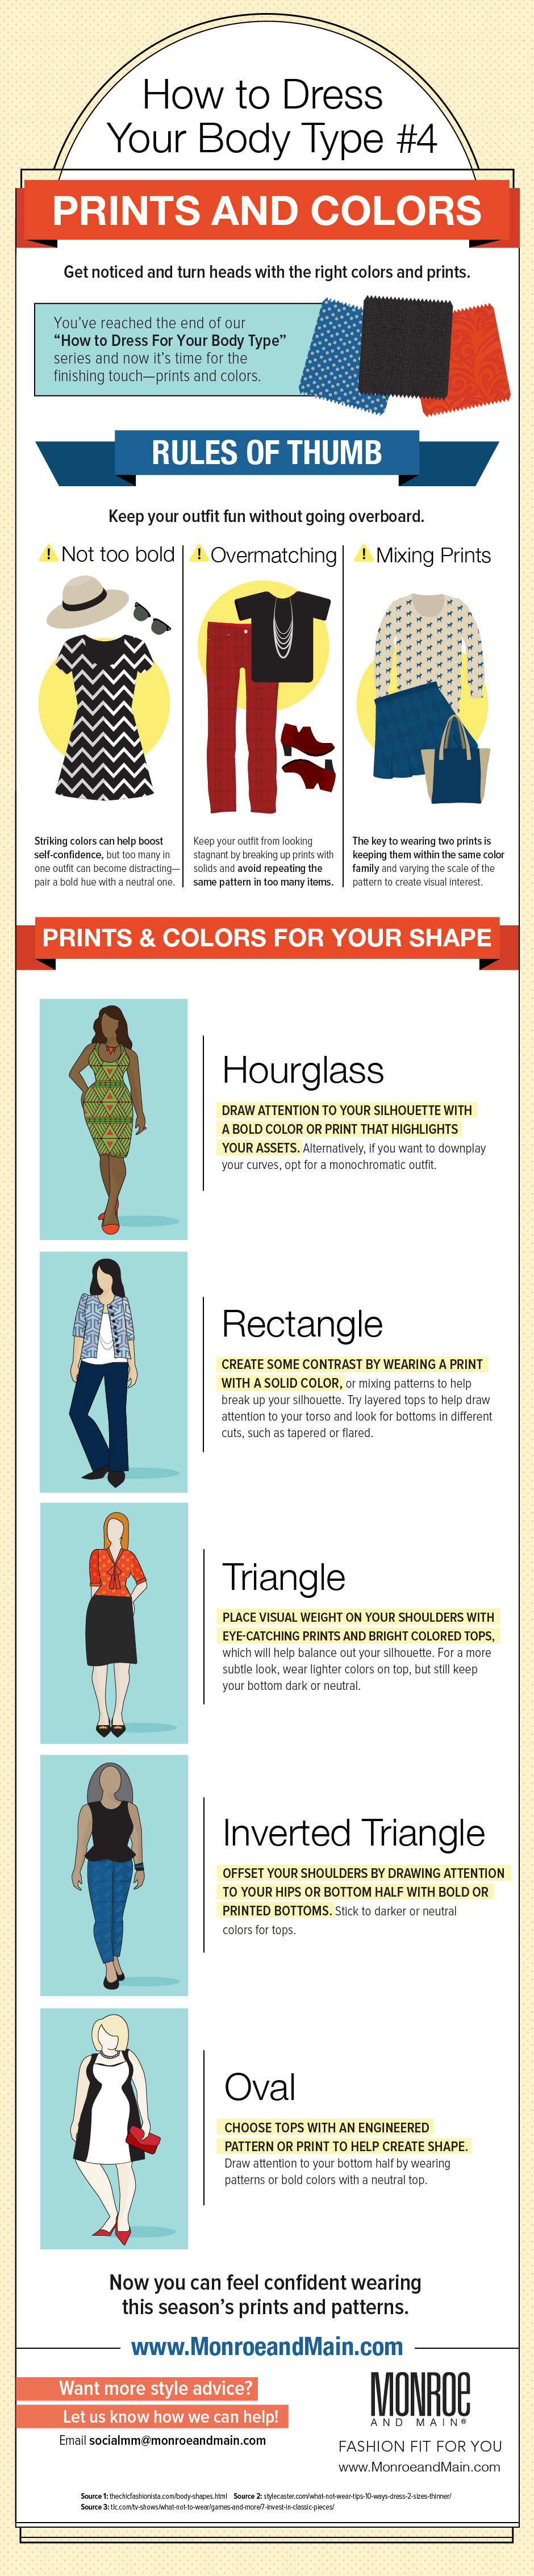 How to Dress Your Body Type Infographic Colors & Prints